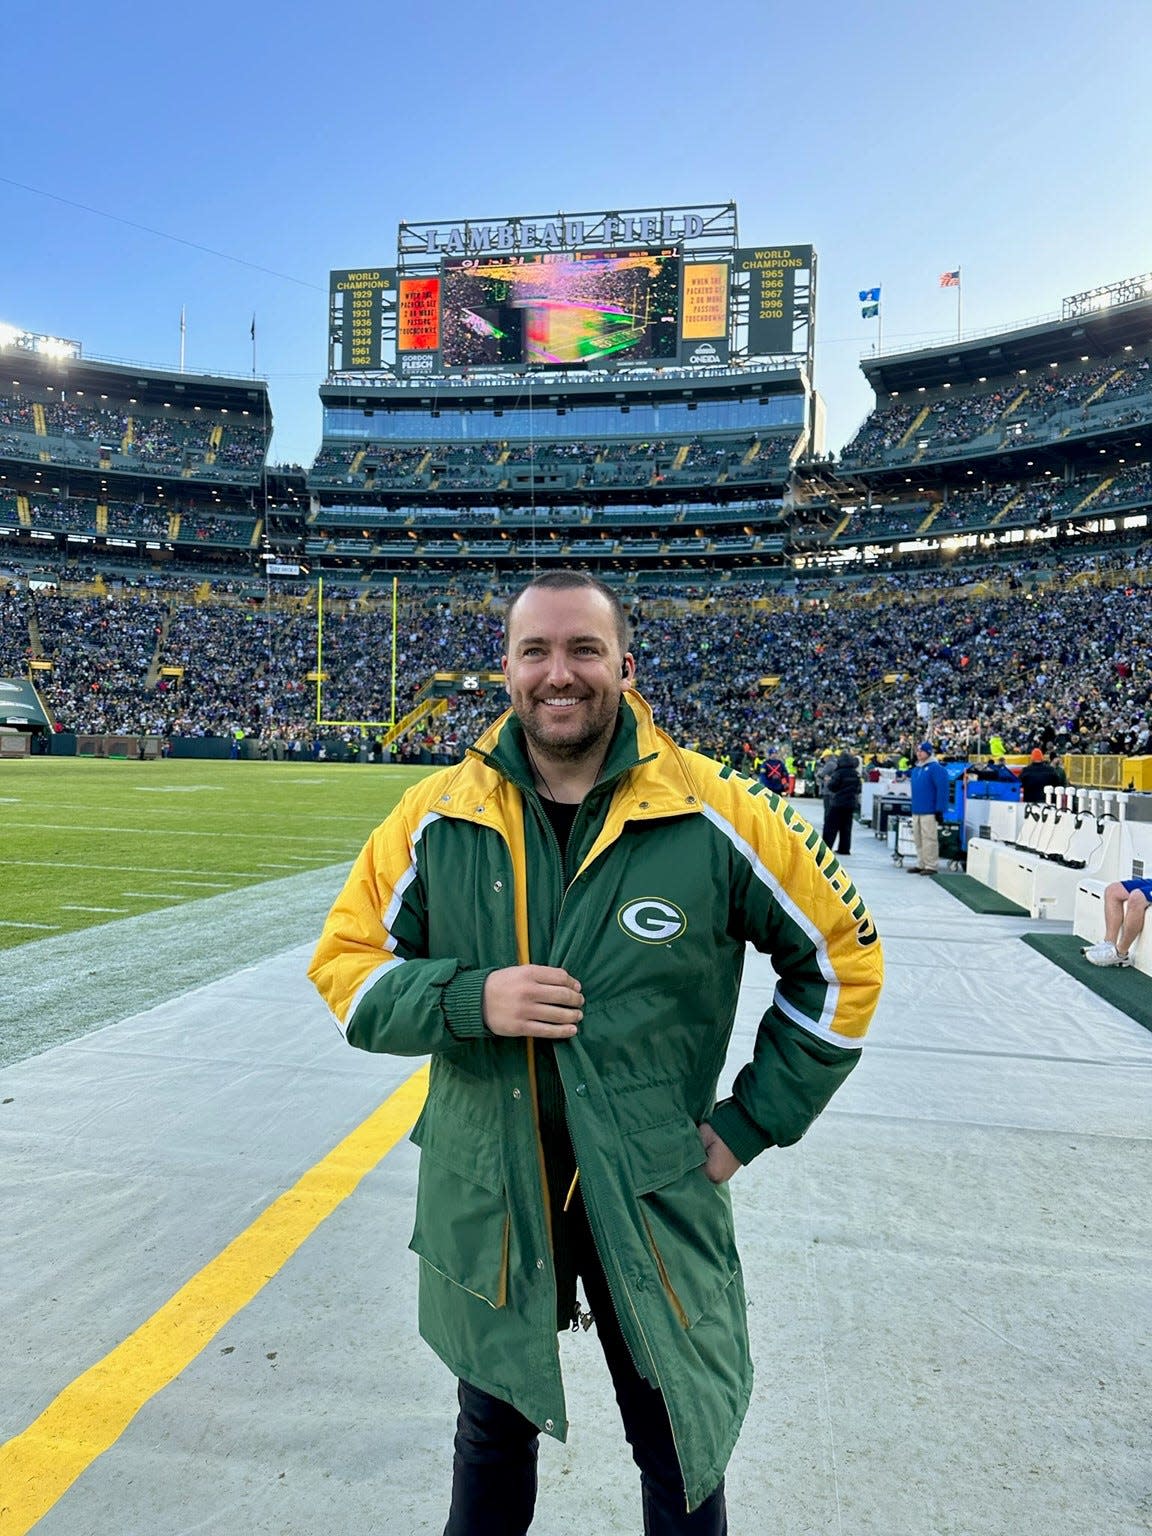 Country music artist Stephen Ray wore one of his dad's old Green Bay Packers parkas when he sang the national anthem at Lambeau Field for the New Year's Day game against the Minnesota Vikings. His dad is Steve Mariucci, who was the Packers quarterbacks coach under Mike Holmgren during the 1990s.